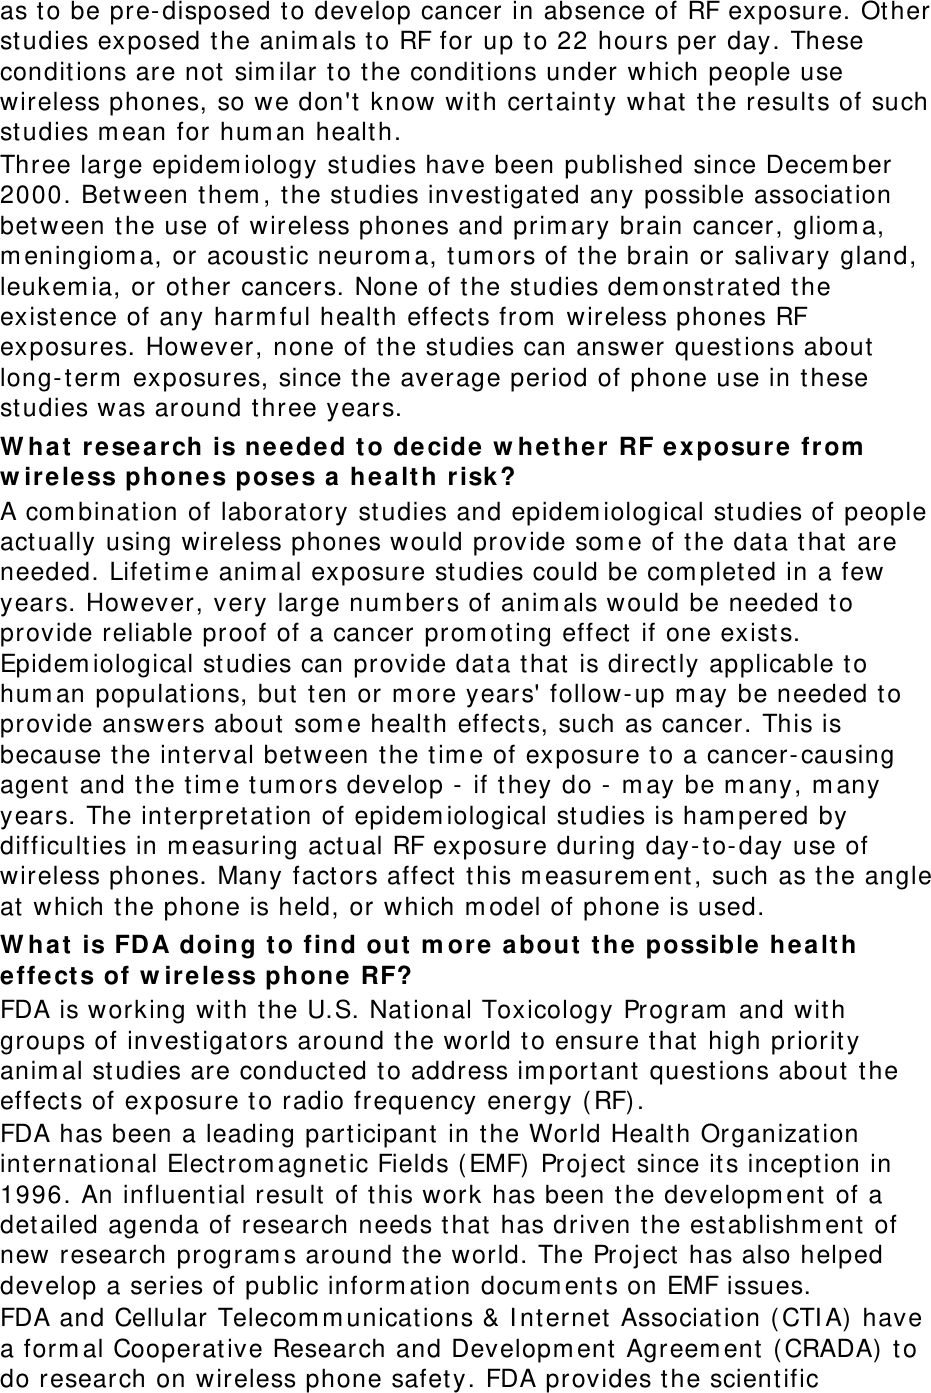 as t o be pre-disposed to develop cancer in absence of RF exposure. Ot her studies exposed t he anim als t o RF for up t o 22 hours per day. These conditions are not sim ilar to the conditions under which people use wireless phones, so we don&apos;t  know wit h certainty what t he results of such studies m ean for hum an health. Three large epidem iology st udies have been published since Decem ber 2000. Bet ween t hem , t he st udies invest igated any possible association bet ween t he use of wireless phones and prim ary brain cancer, gliom a, m eningiom a, or acoust ic neurom a, t um ors of t he brain or salivary gland, leukem ia, or other cancers. None of t he st udies dem onst rated t he existence of any harm ful health effect s from  wireless phones RF exposures. However, none of t he st udies can answer quest ions about  long- t erm  exposures, since t he average period of phone use in t hese studies was around t hree years. W hat  r esear ch is needed to de cide w het he r RF exposure  from  w ireless phones pose s a  he alt h r isk ? A com bination of laboratory studies and epidem iological studies of people act ually using wireless phones would provide som e of t he dat a t hat are needed. Lifetim e anim al exposure studies could be com plet ed in a few years. However, very large num bers of anim als would be needed t o provide reliable proof of a cancer prom ot ing effect  if one exists. Epidem iological studies can provide dat a that is directly applicable t o hum an populat ions, but  ten or m ore years&apos; follow-up m ay be needed t o provide answers about  som e healt h effect s, such as cancer. This is because the int erval bet ween t he tim e of exposure to a cancer- causing agent and t he tim e t um ors develop -  if they do -  m ay be m any, m any years. The int erpret ation of epidem iological studies is ham pered by difficulties in m easuring act ual RF exposure during day- t o- day use of wireless phones. Many fact ors affect  this m easurem ent , such as t he angle at  which t he phone is held, or which m odel of phone is used. W hat  is FDA doing t o find out m ore a bout t he  possible  hea lt h effe ct s of w ir eless phone  RF? FDA is working wit h t he U.S. National Toxicology Program  and with groups of invest igat ors around t he world t o ensure t hat high priority anim al st udies are conducted t o address im port ant  quest ions about  t he effect s of exposure to radio frequency energy ( RF) . FDA has been a leading part icipant  in the World Health Organizat ion international Elect rom agnetic Fields ( EMF)  Proj ect  since its incept ion in 1996. An influential result of t his work has been the developm ent  of a det ailed agenda of research needs t hat has driven t he establishm ent of new research program s around the world. The Proj ect  has also helped develop a series of public inform ation docum ents on EMF issues. FDA and Cellular Telecom m unicat ions &amp; I nternet Association ( CTI A) have a form al Cooperative Research and Developm ent  Agreem ent ( CRADA)  to do research on wireless phone safet y. FDA provides the scient ific 